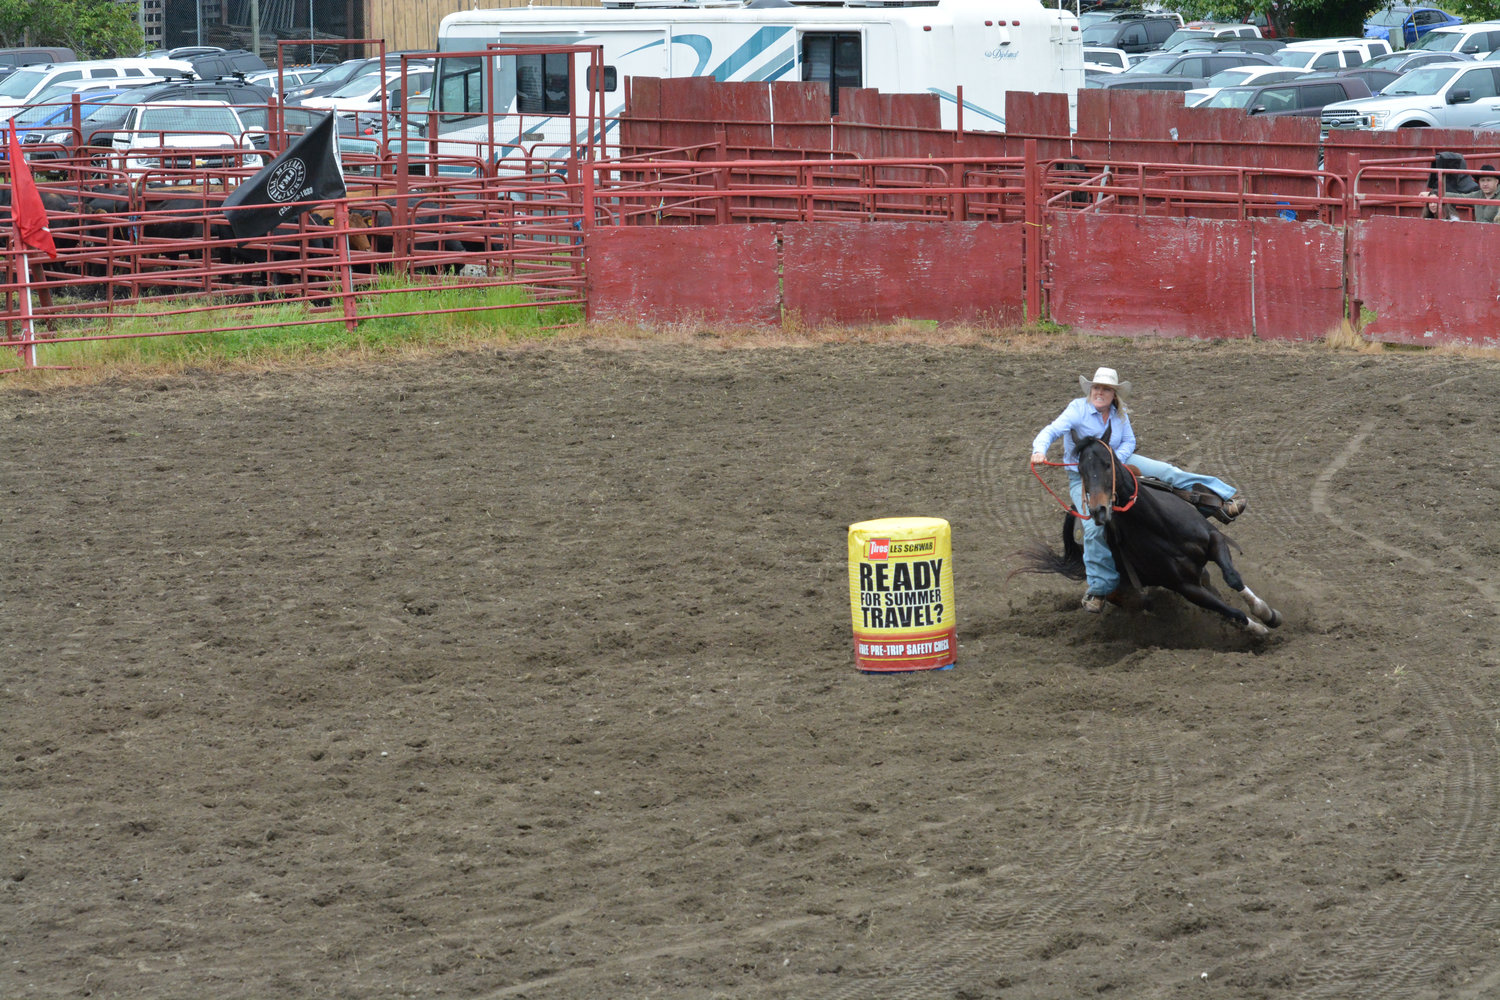 A cowgirl navigates her horse around a barrel during the barrel racing contest on June 4 in Roy.